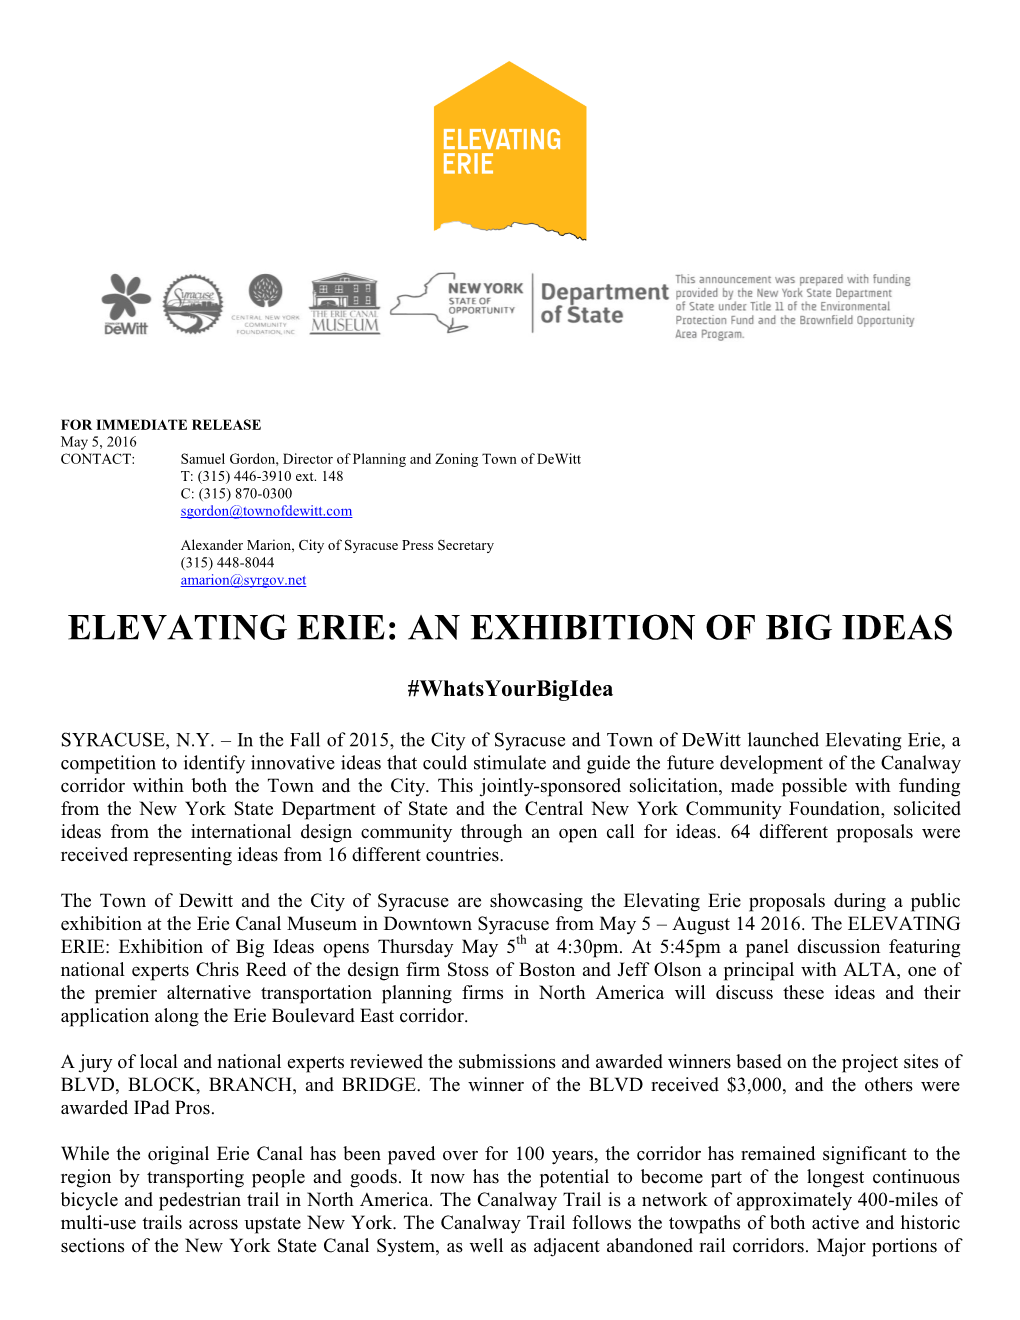 Elevating Erie: an Exhibition of Big Ideas